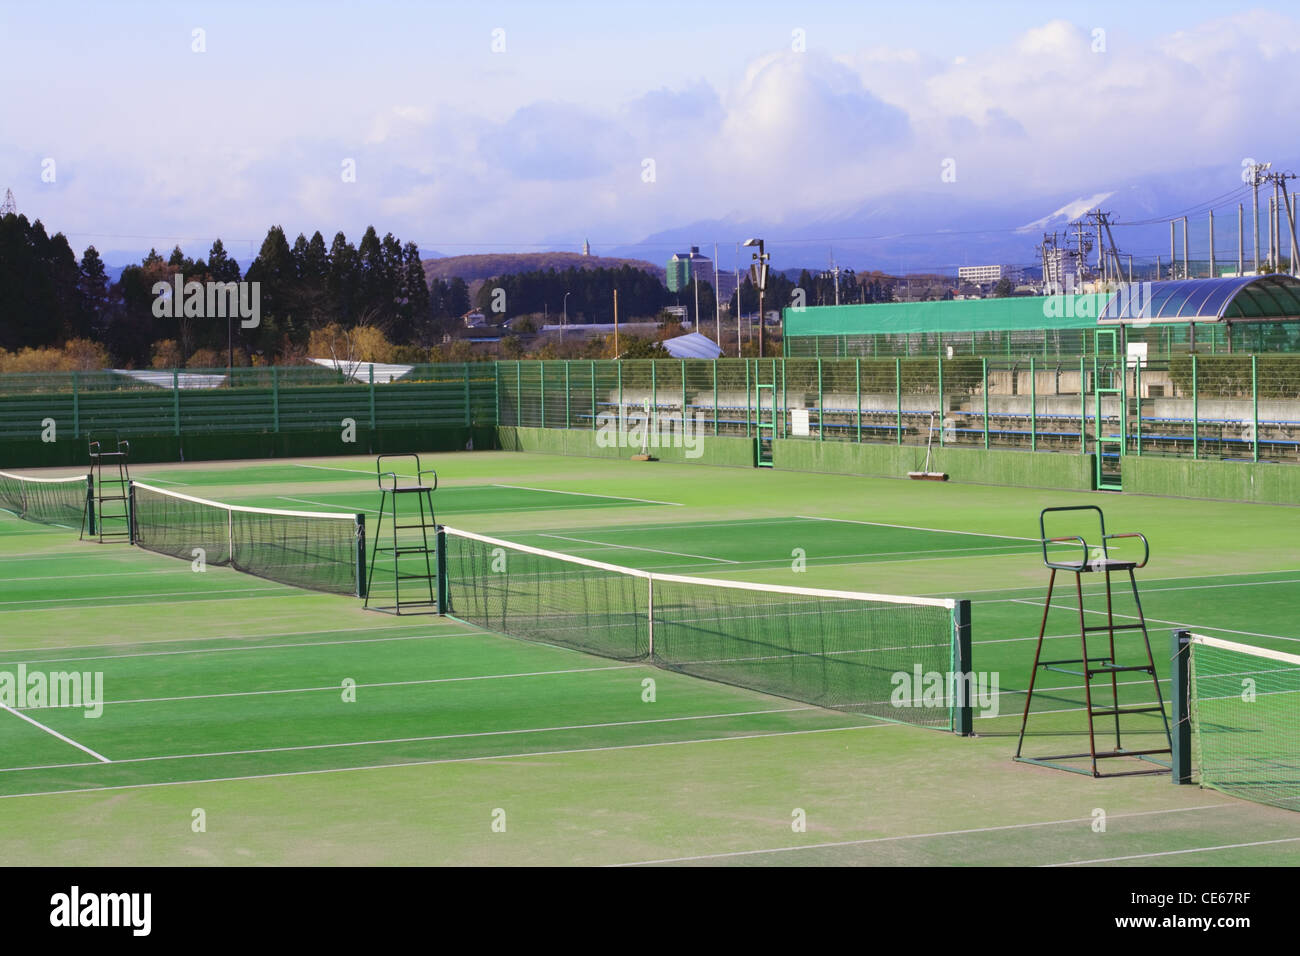 General view of few tennis courts in a sports complex at the margin of a city. Stock Photo